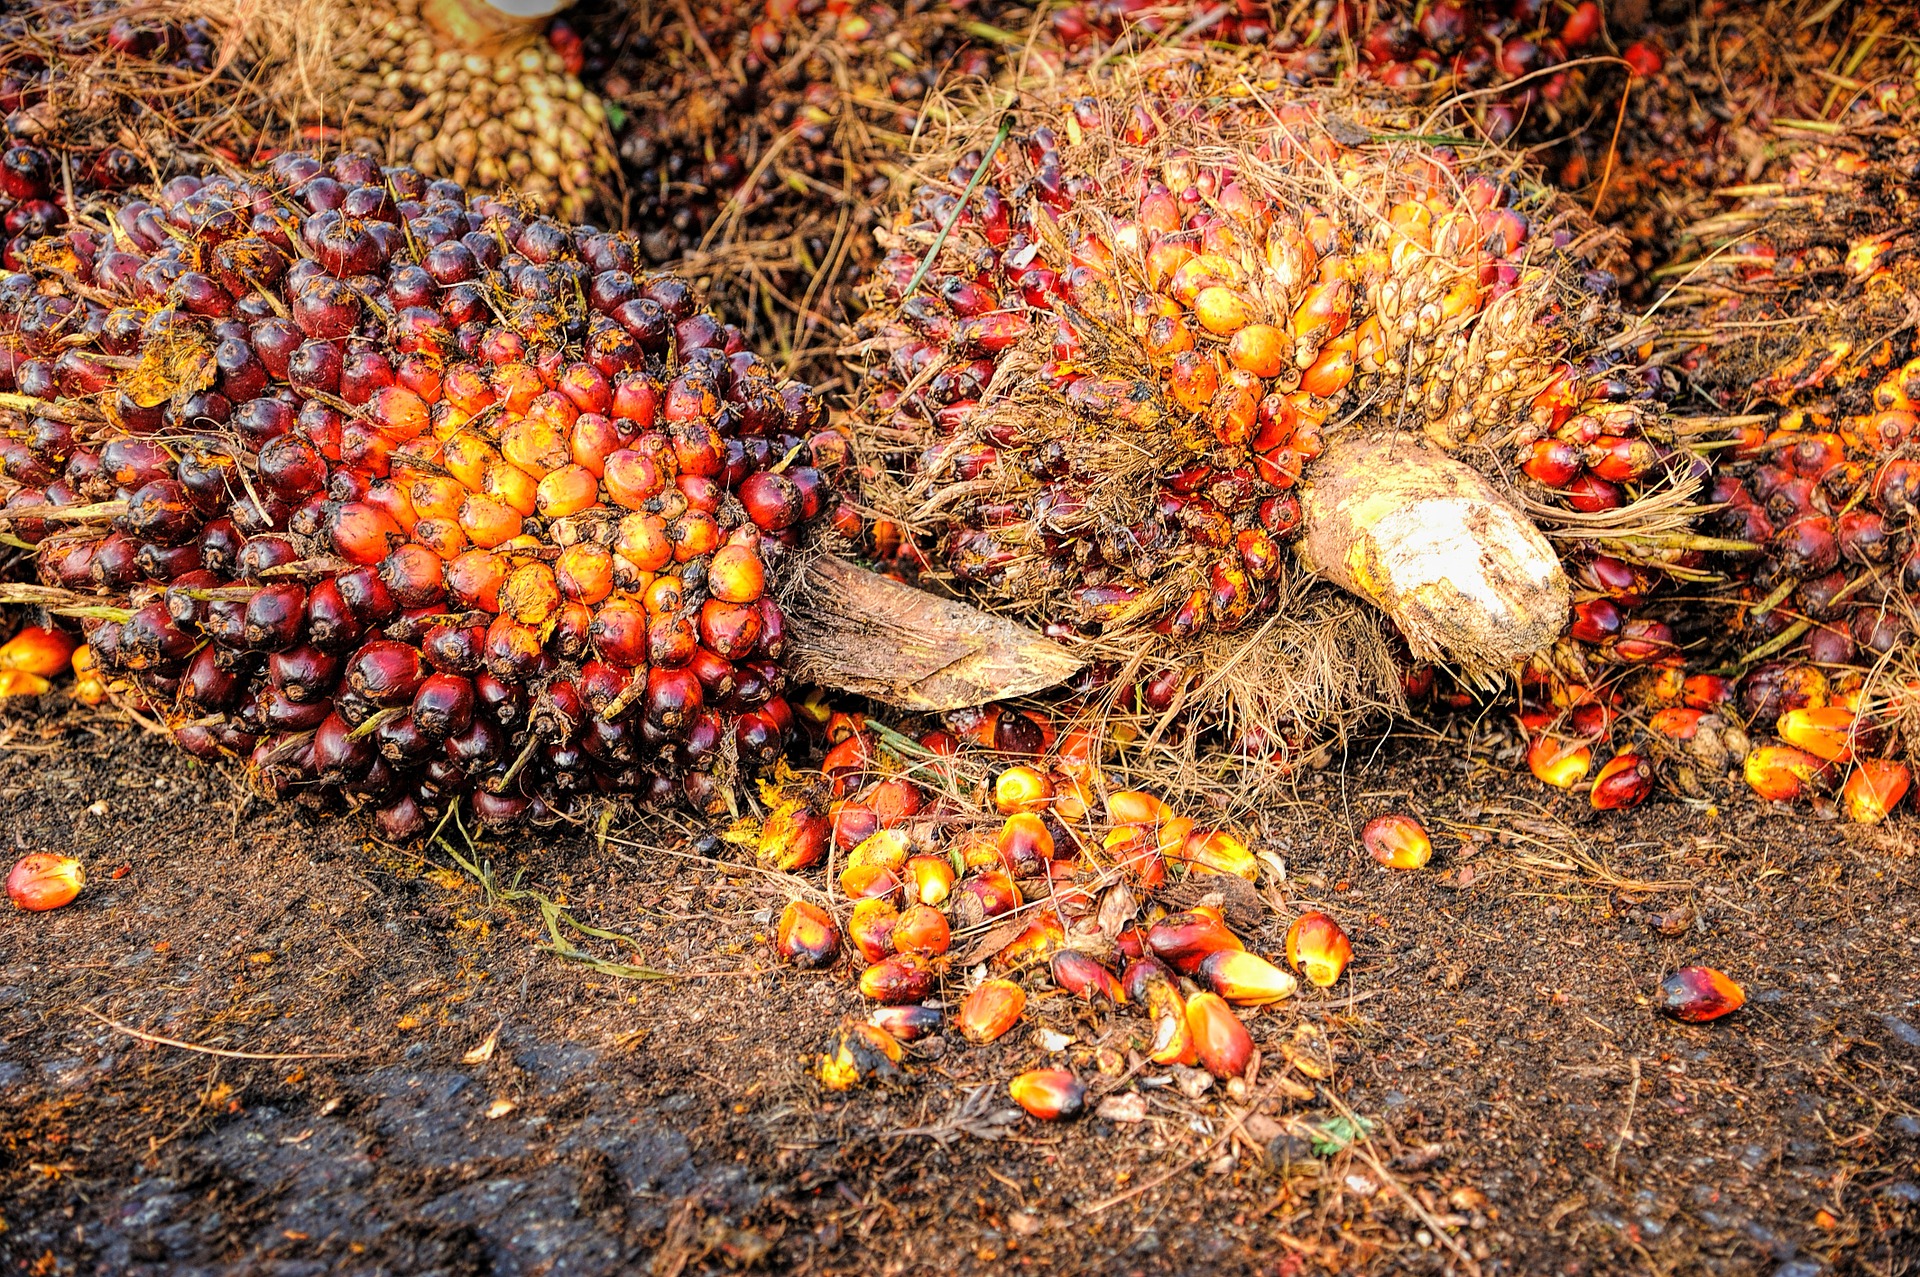 Palm oil processing business in Nigeria